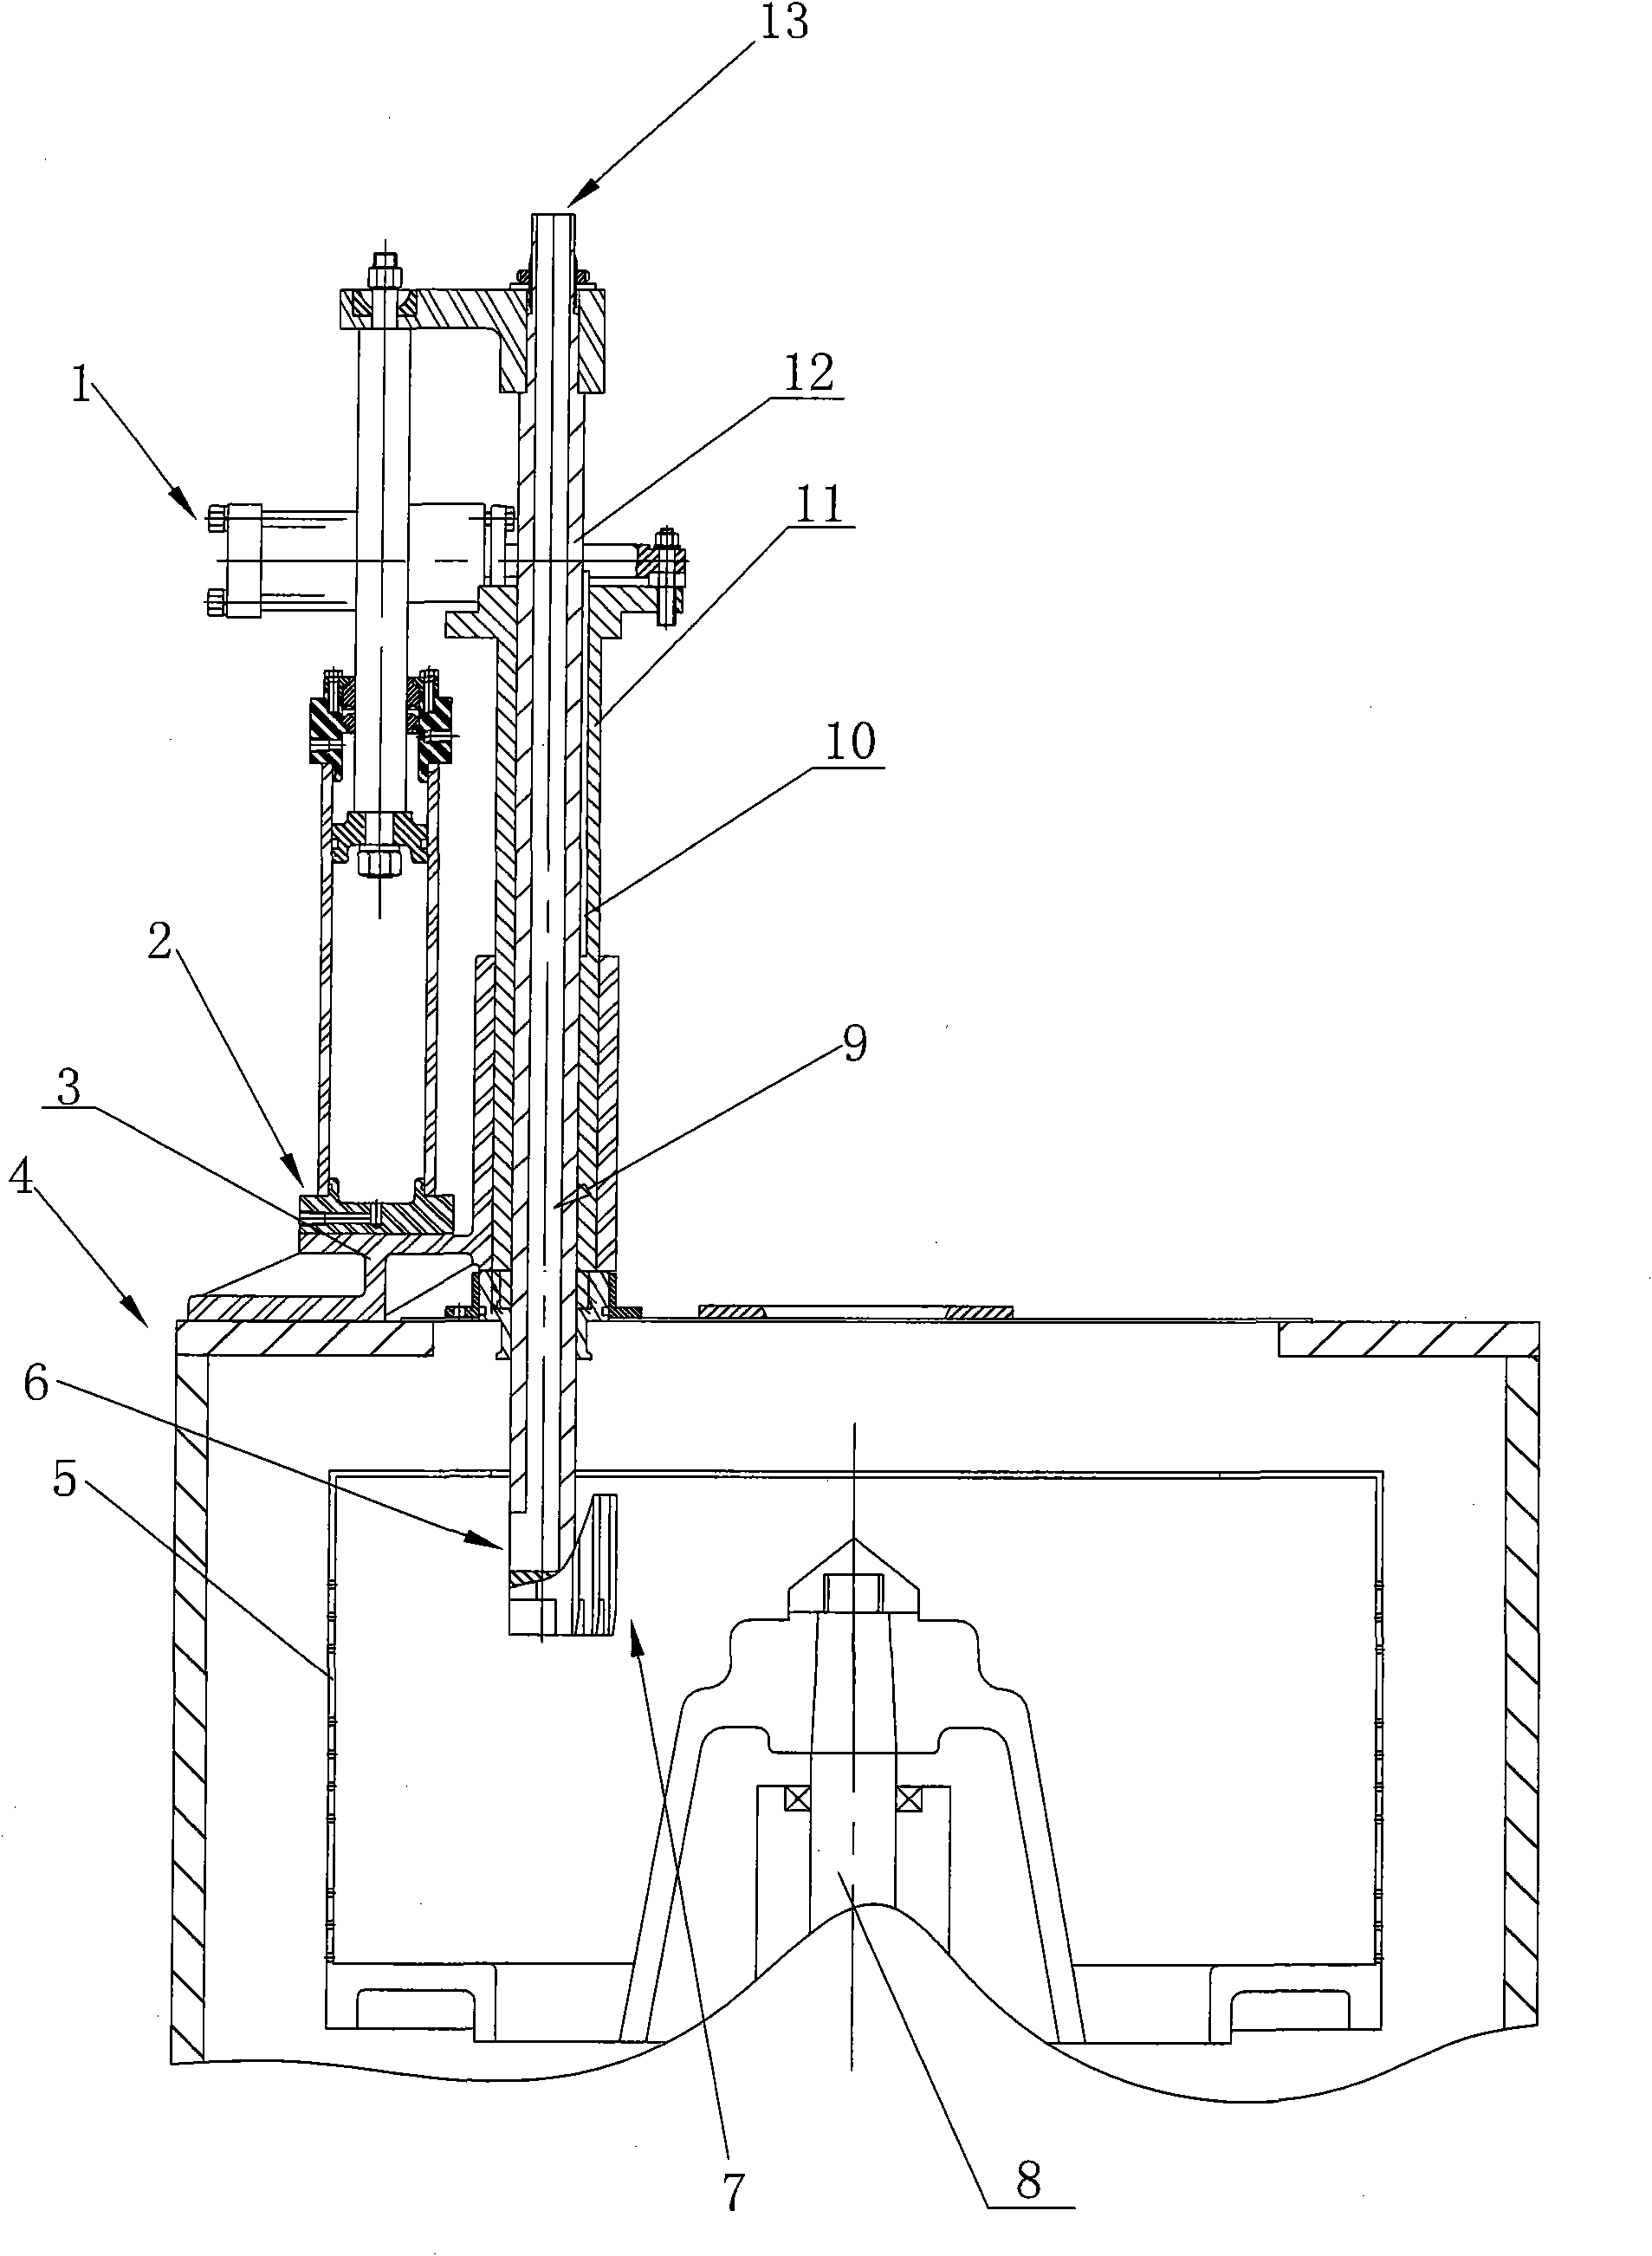 Distributing and discharging device for centrifuge